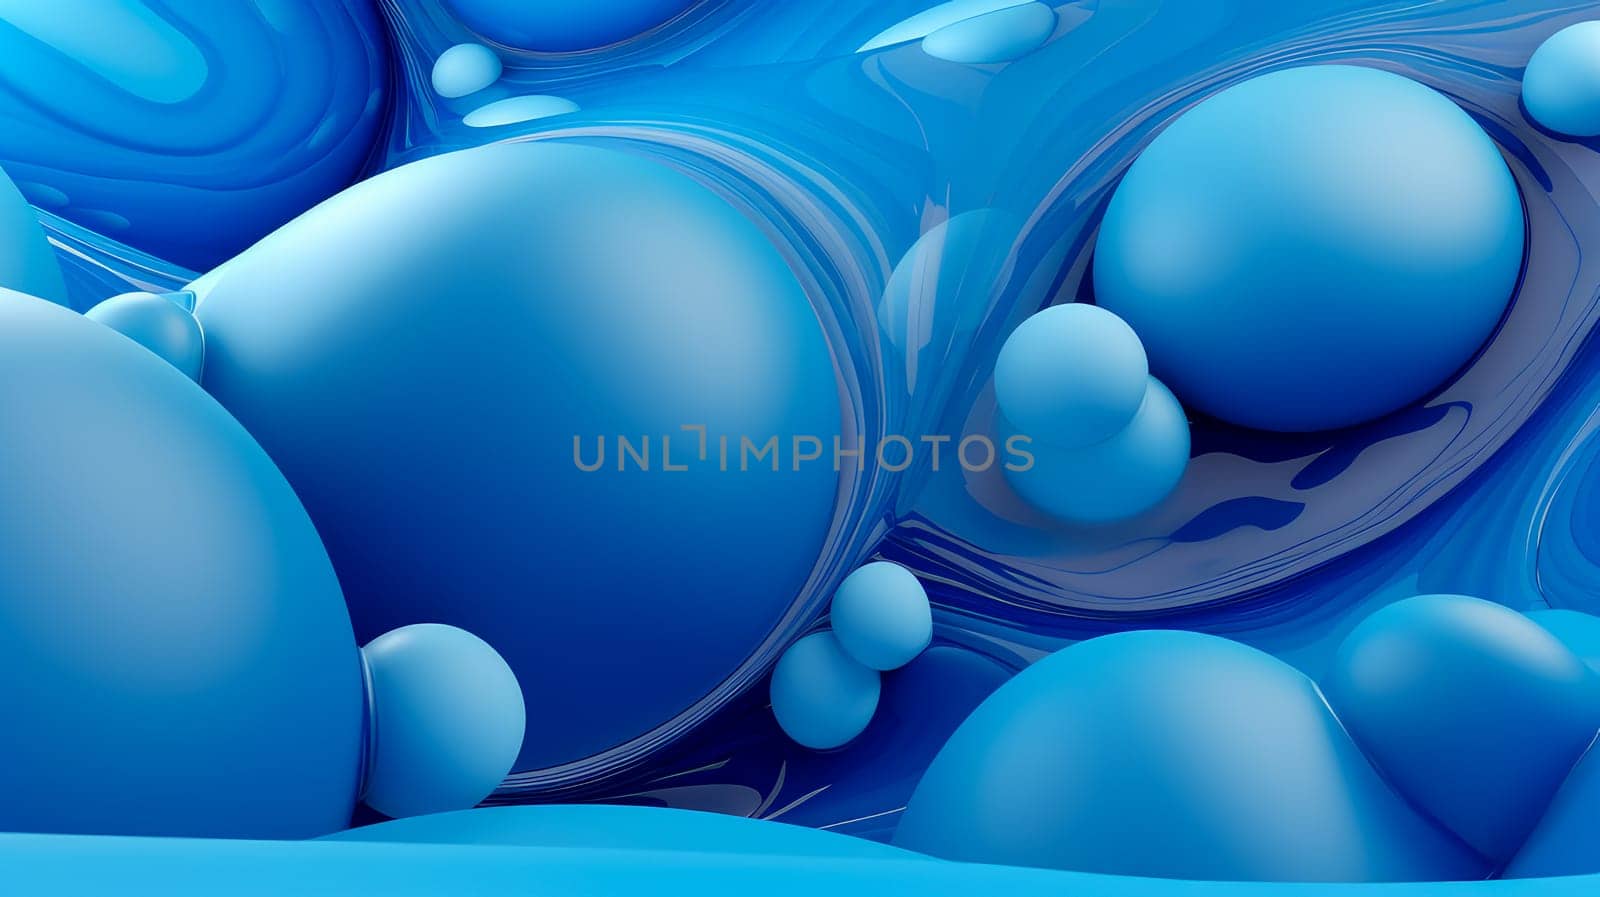 Beautiful luxury creative 3D modern abstract light background consisting of blue balls and spheres with light digital effect, copy space